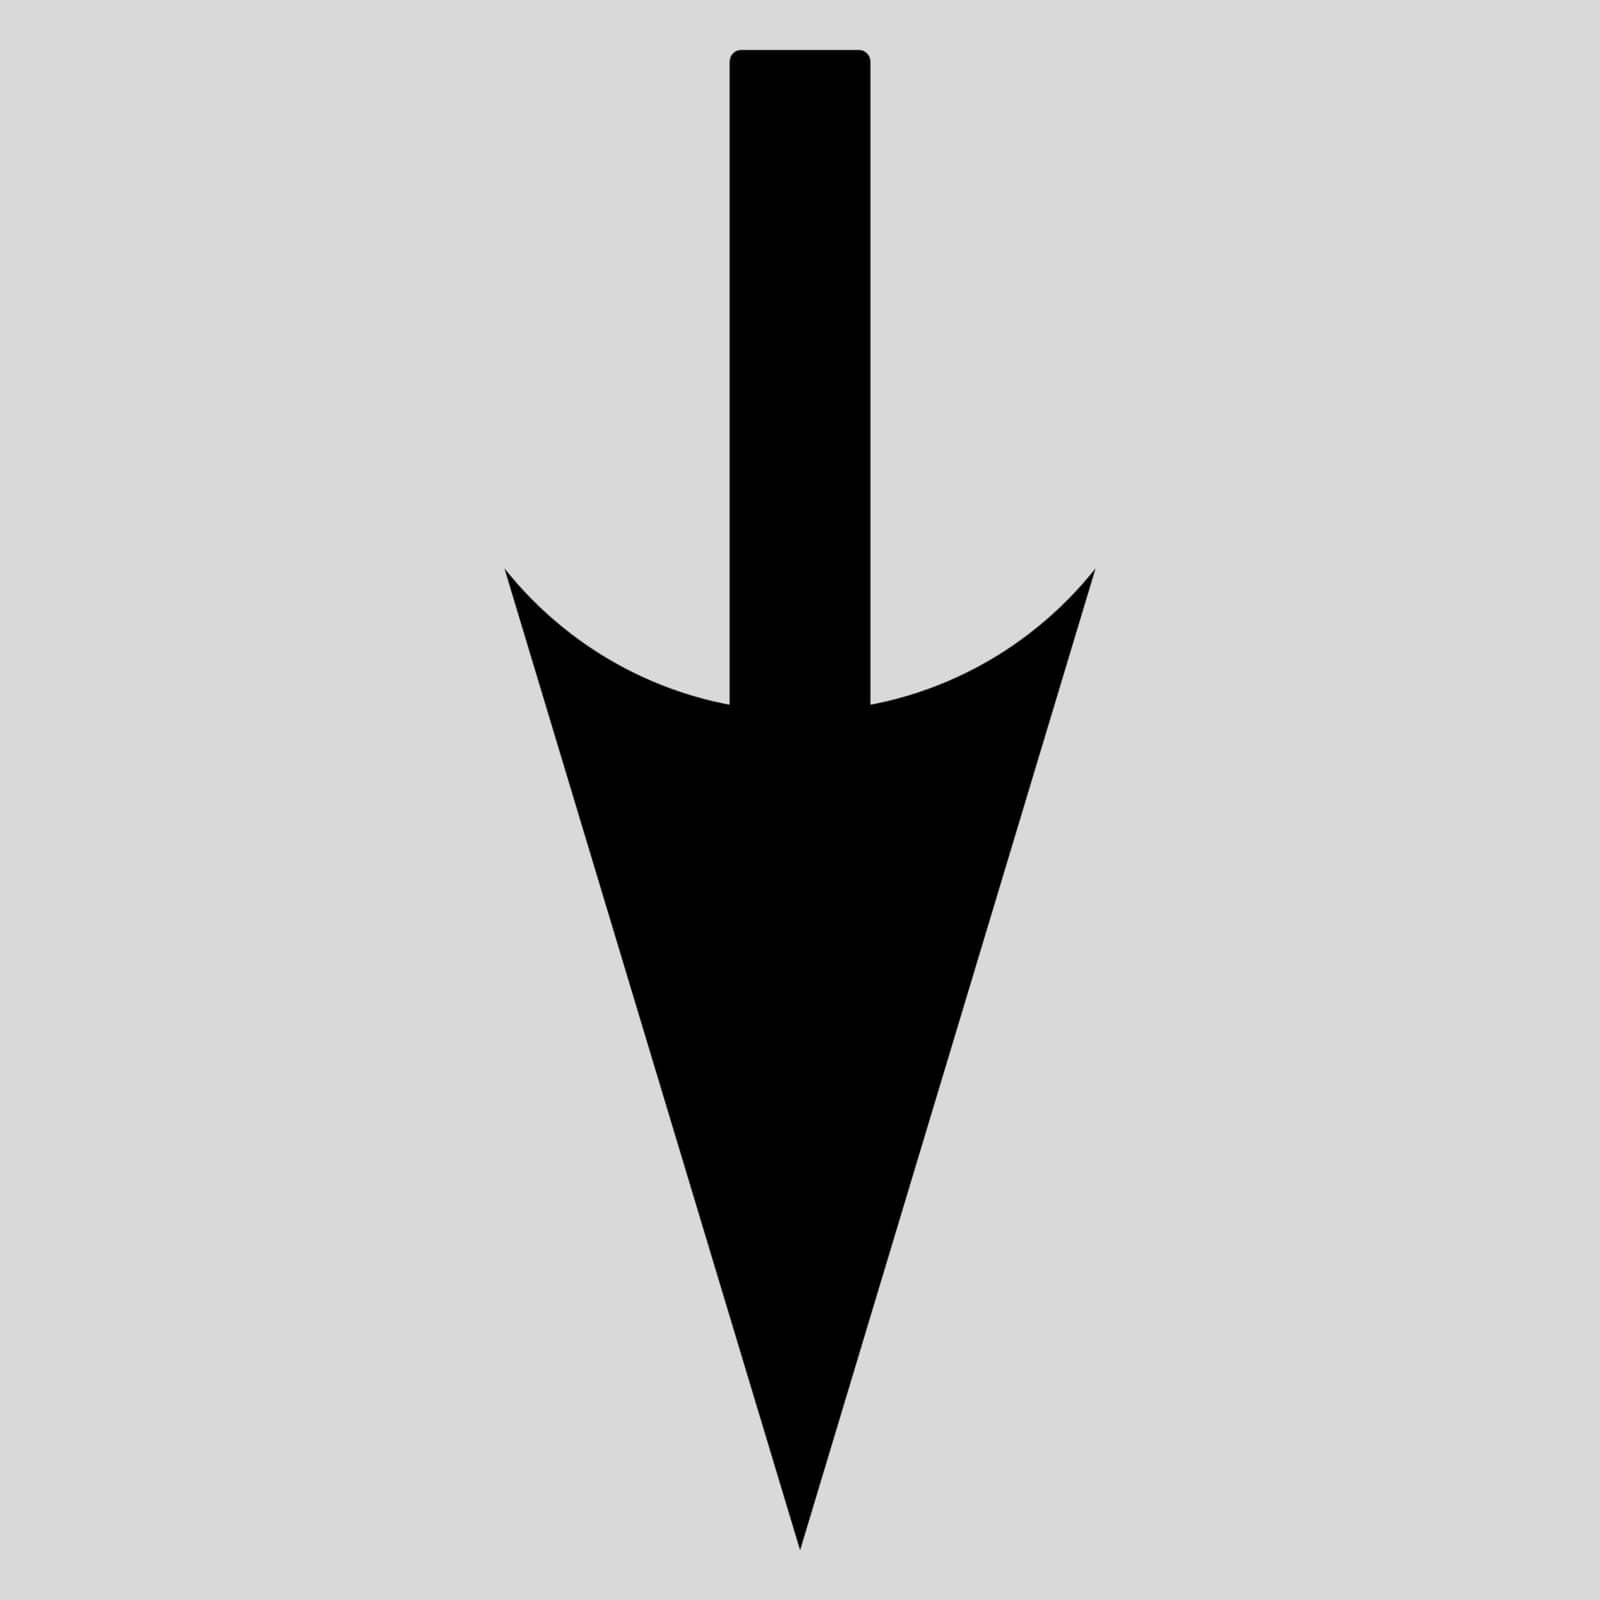 Sharp Down Arrow icon from Primitive Set. This isolated flat symbol is drawn with black color on a light gray background.